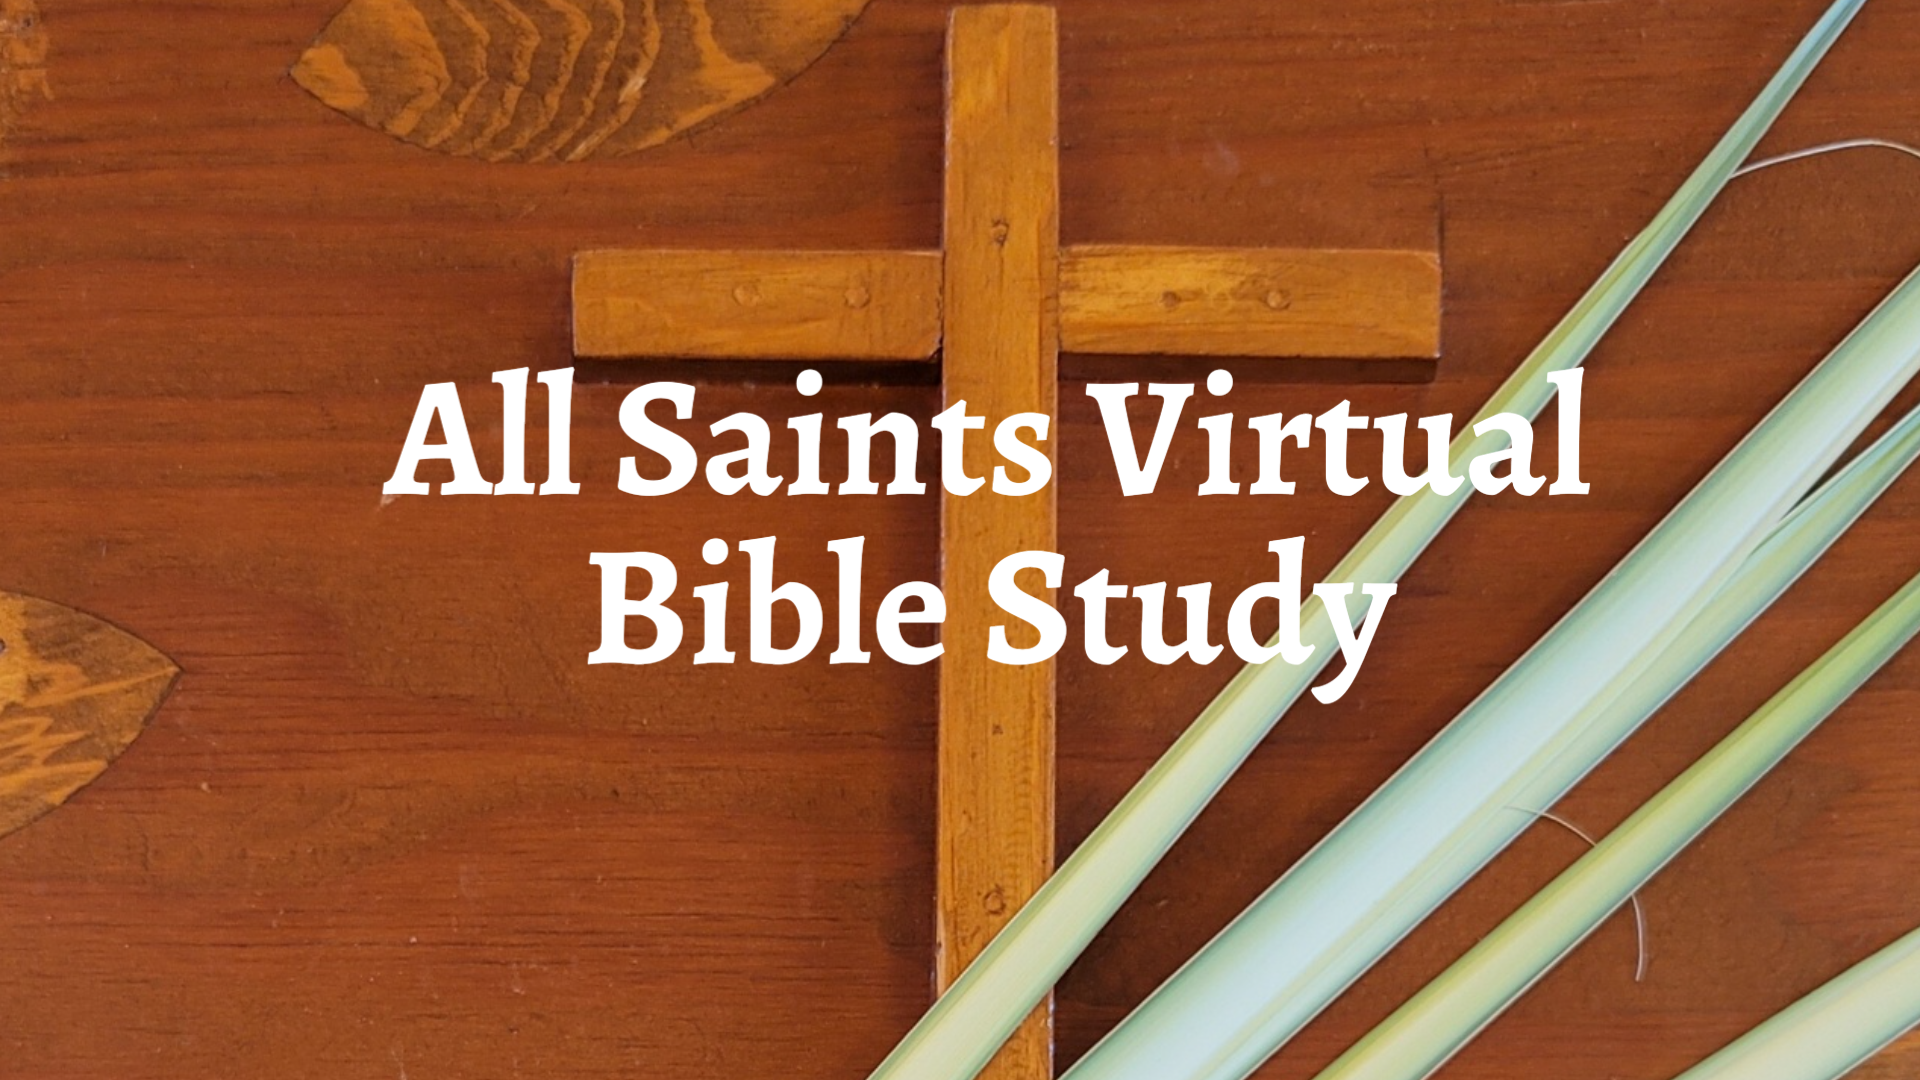 All Saints Virtual Bible Study - The Character of Jesus